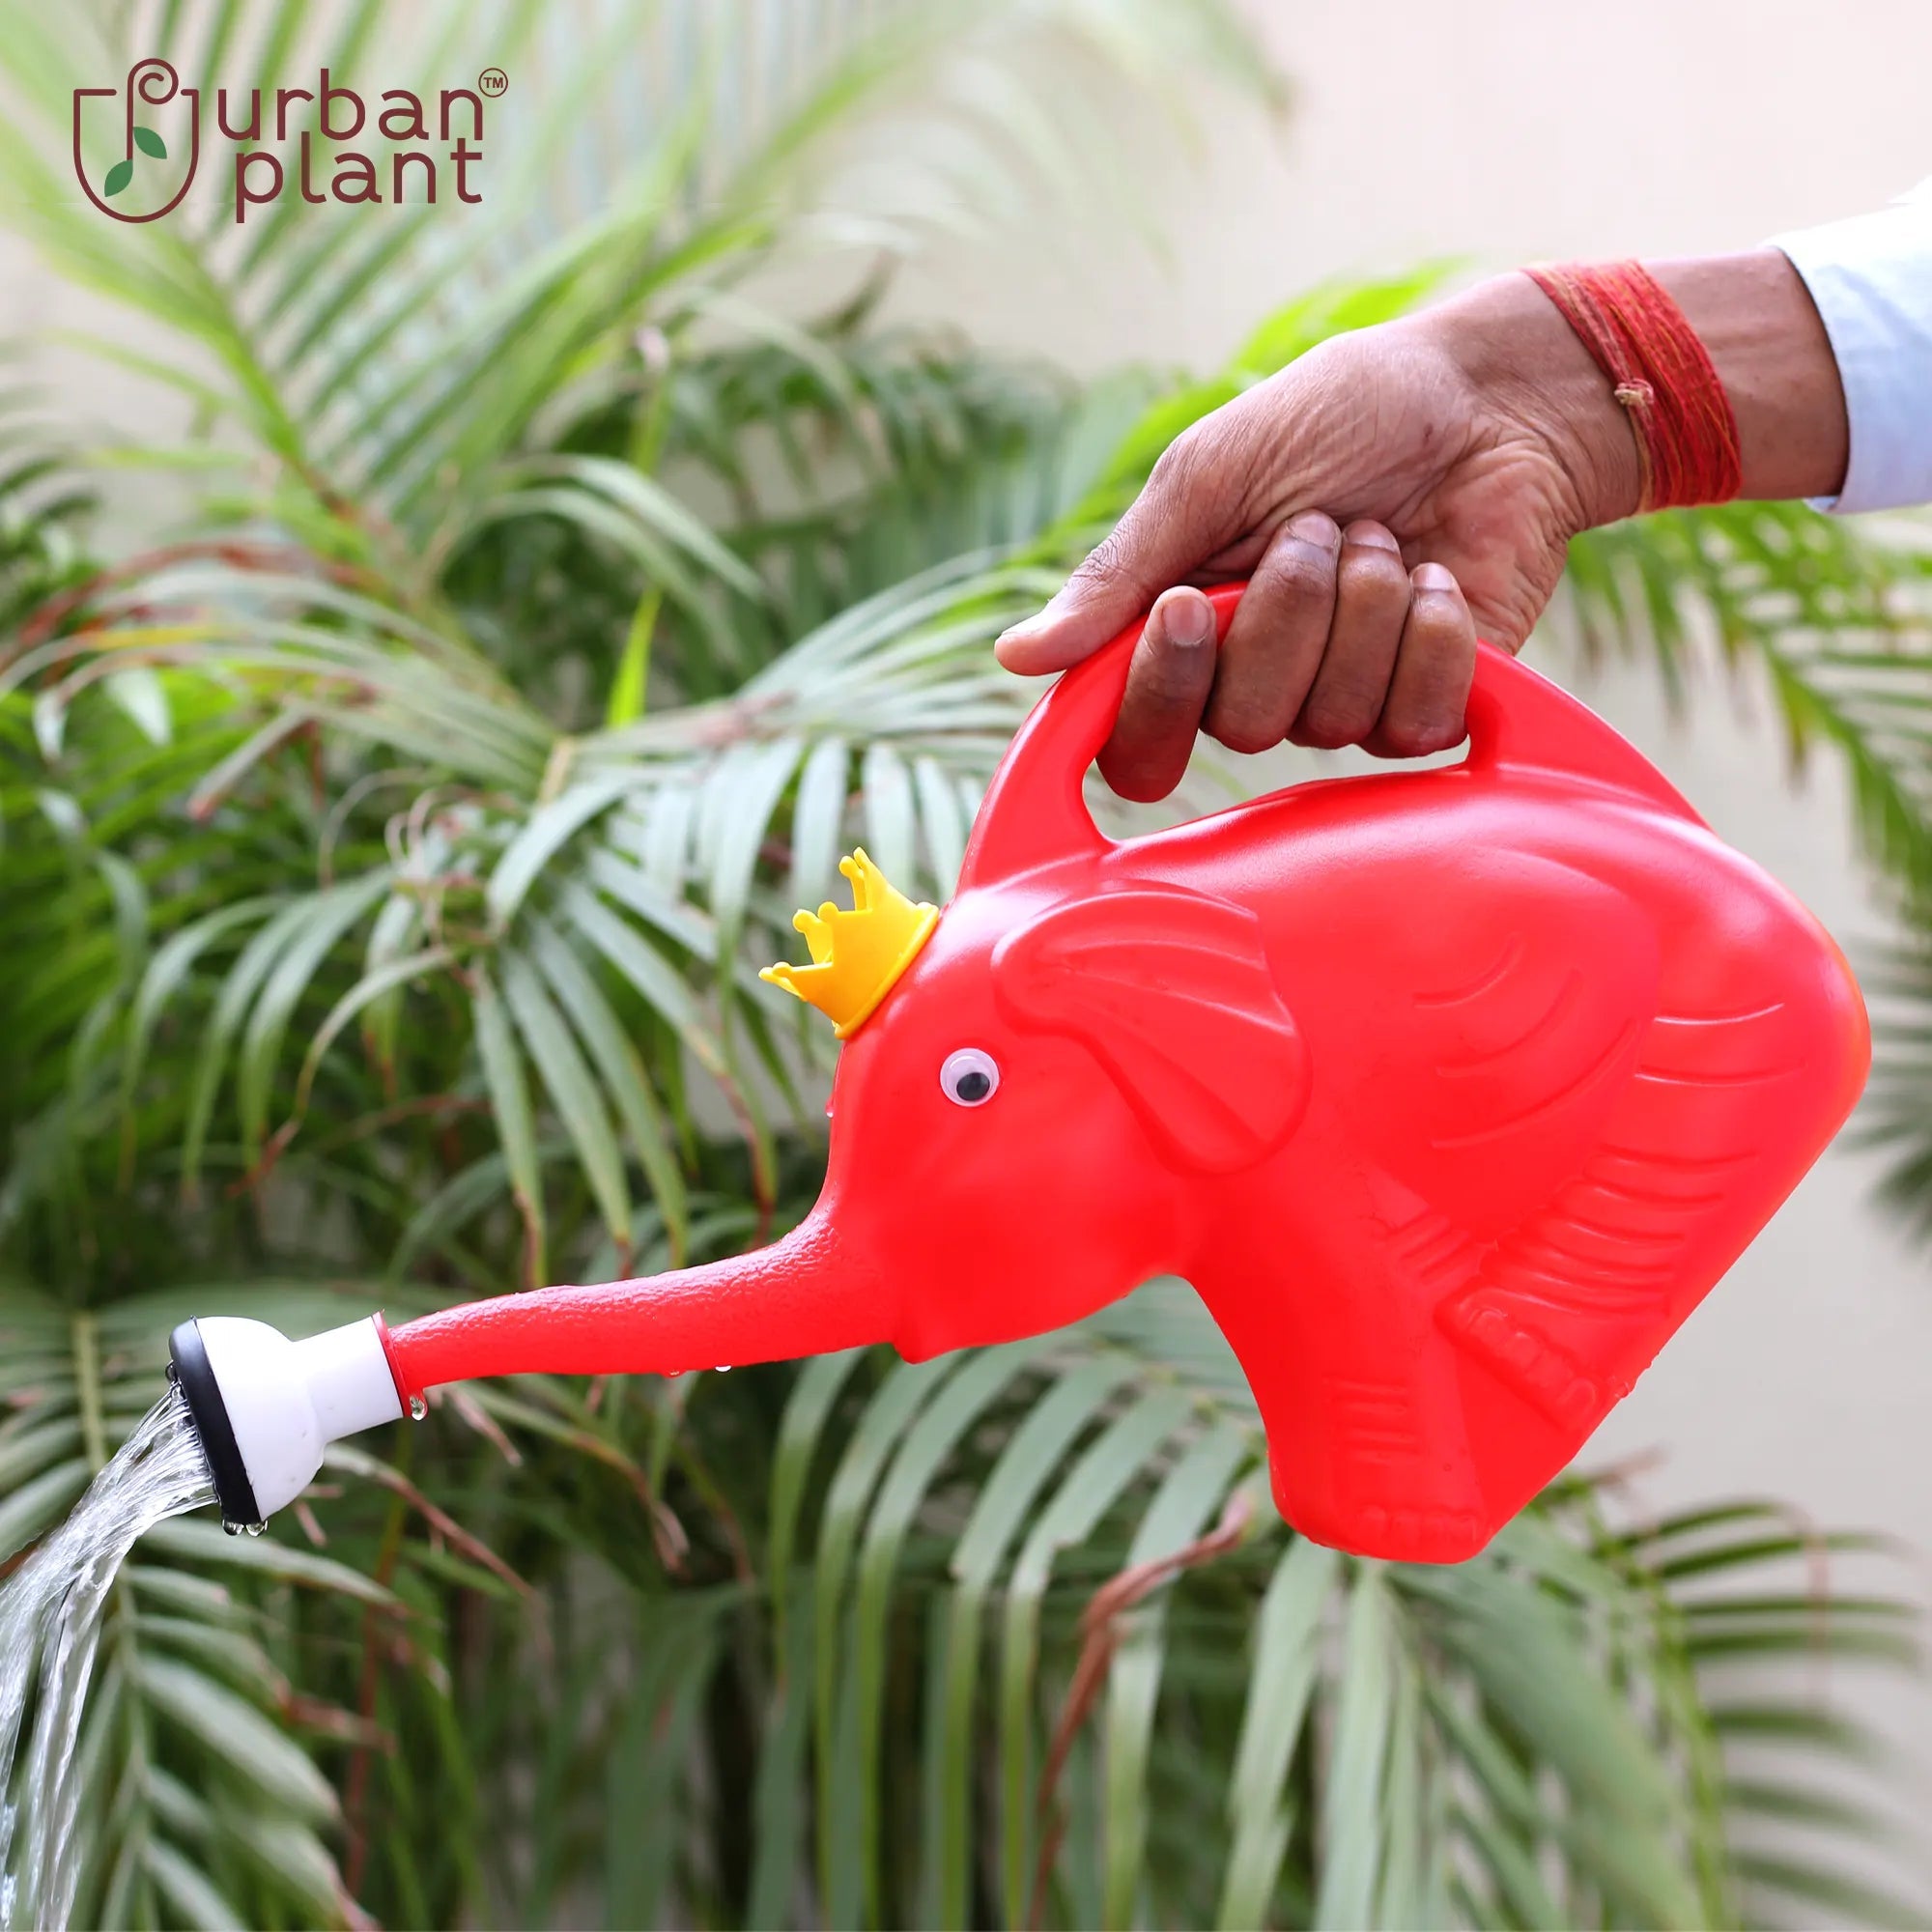 Elephant Watering Can with Detachable Sprayer - 1 Litre Urban Plant 